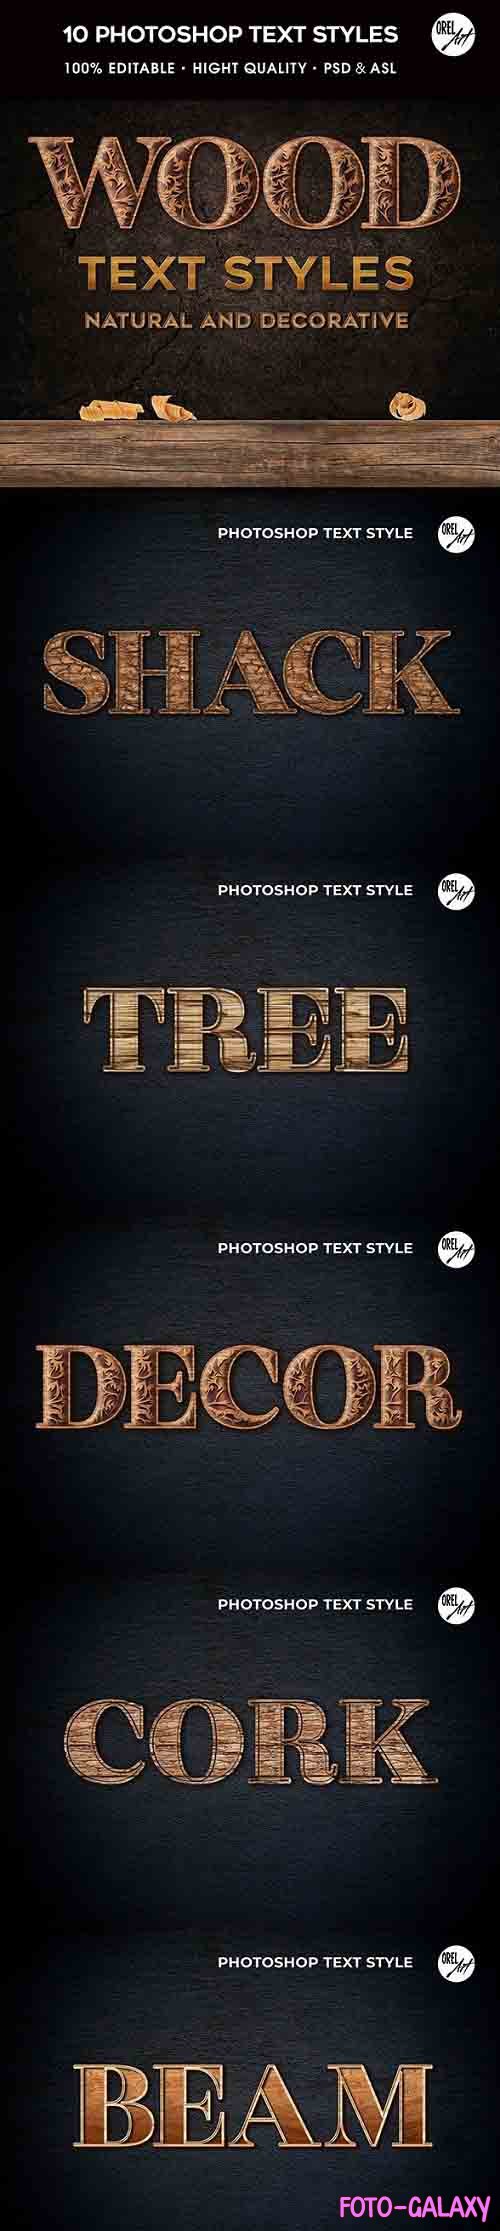 GraphicRiver - Wood Photoshop Styles 30366448